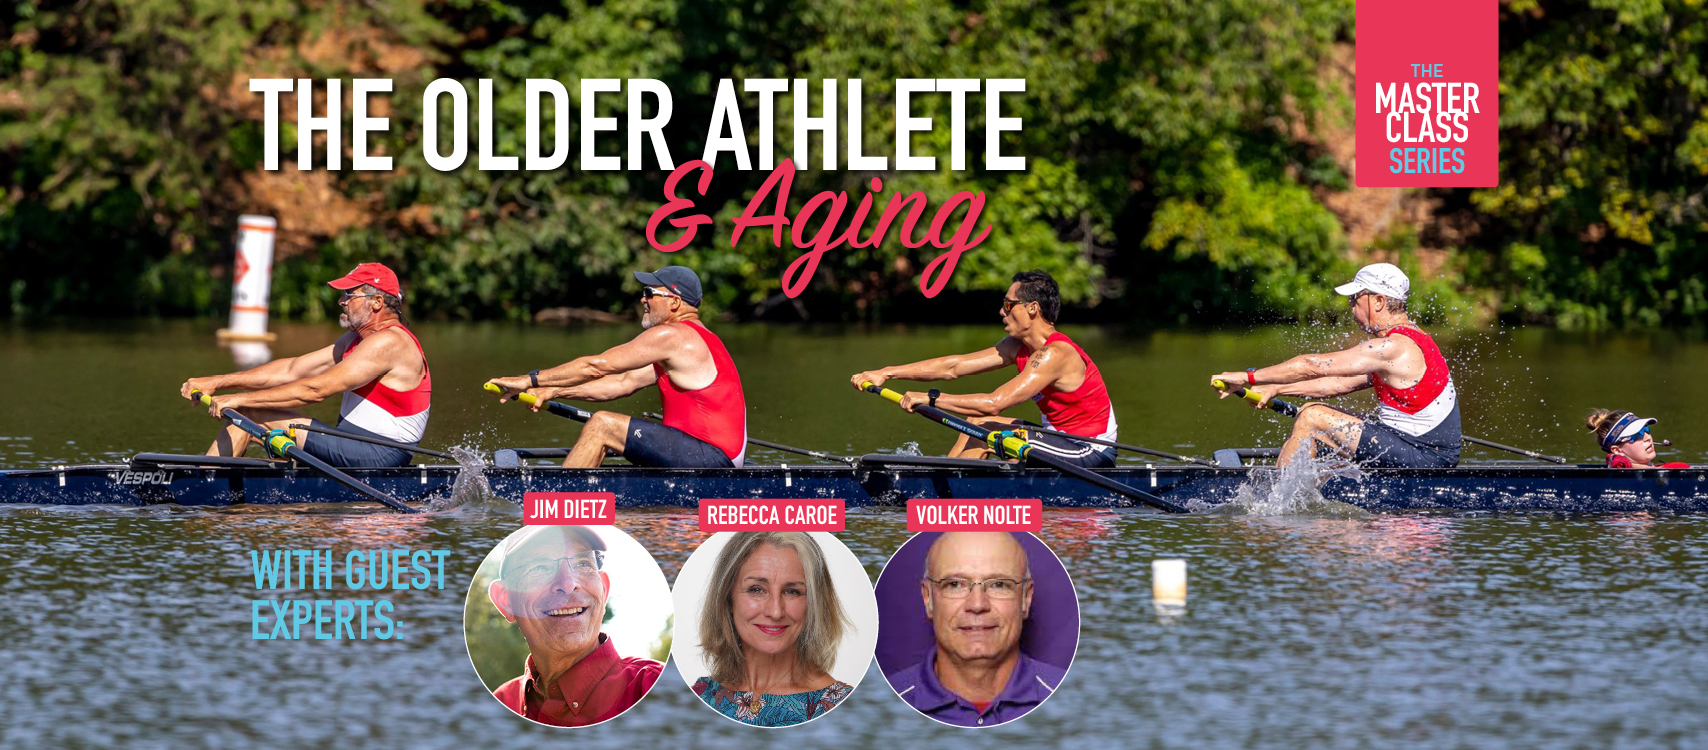 Jim Dietz, Volker Nolte explain how to adjust your rowing as you age and benefit.